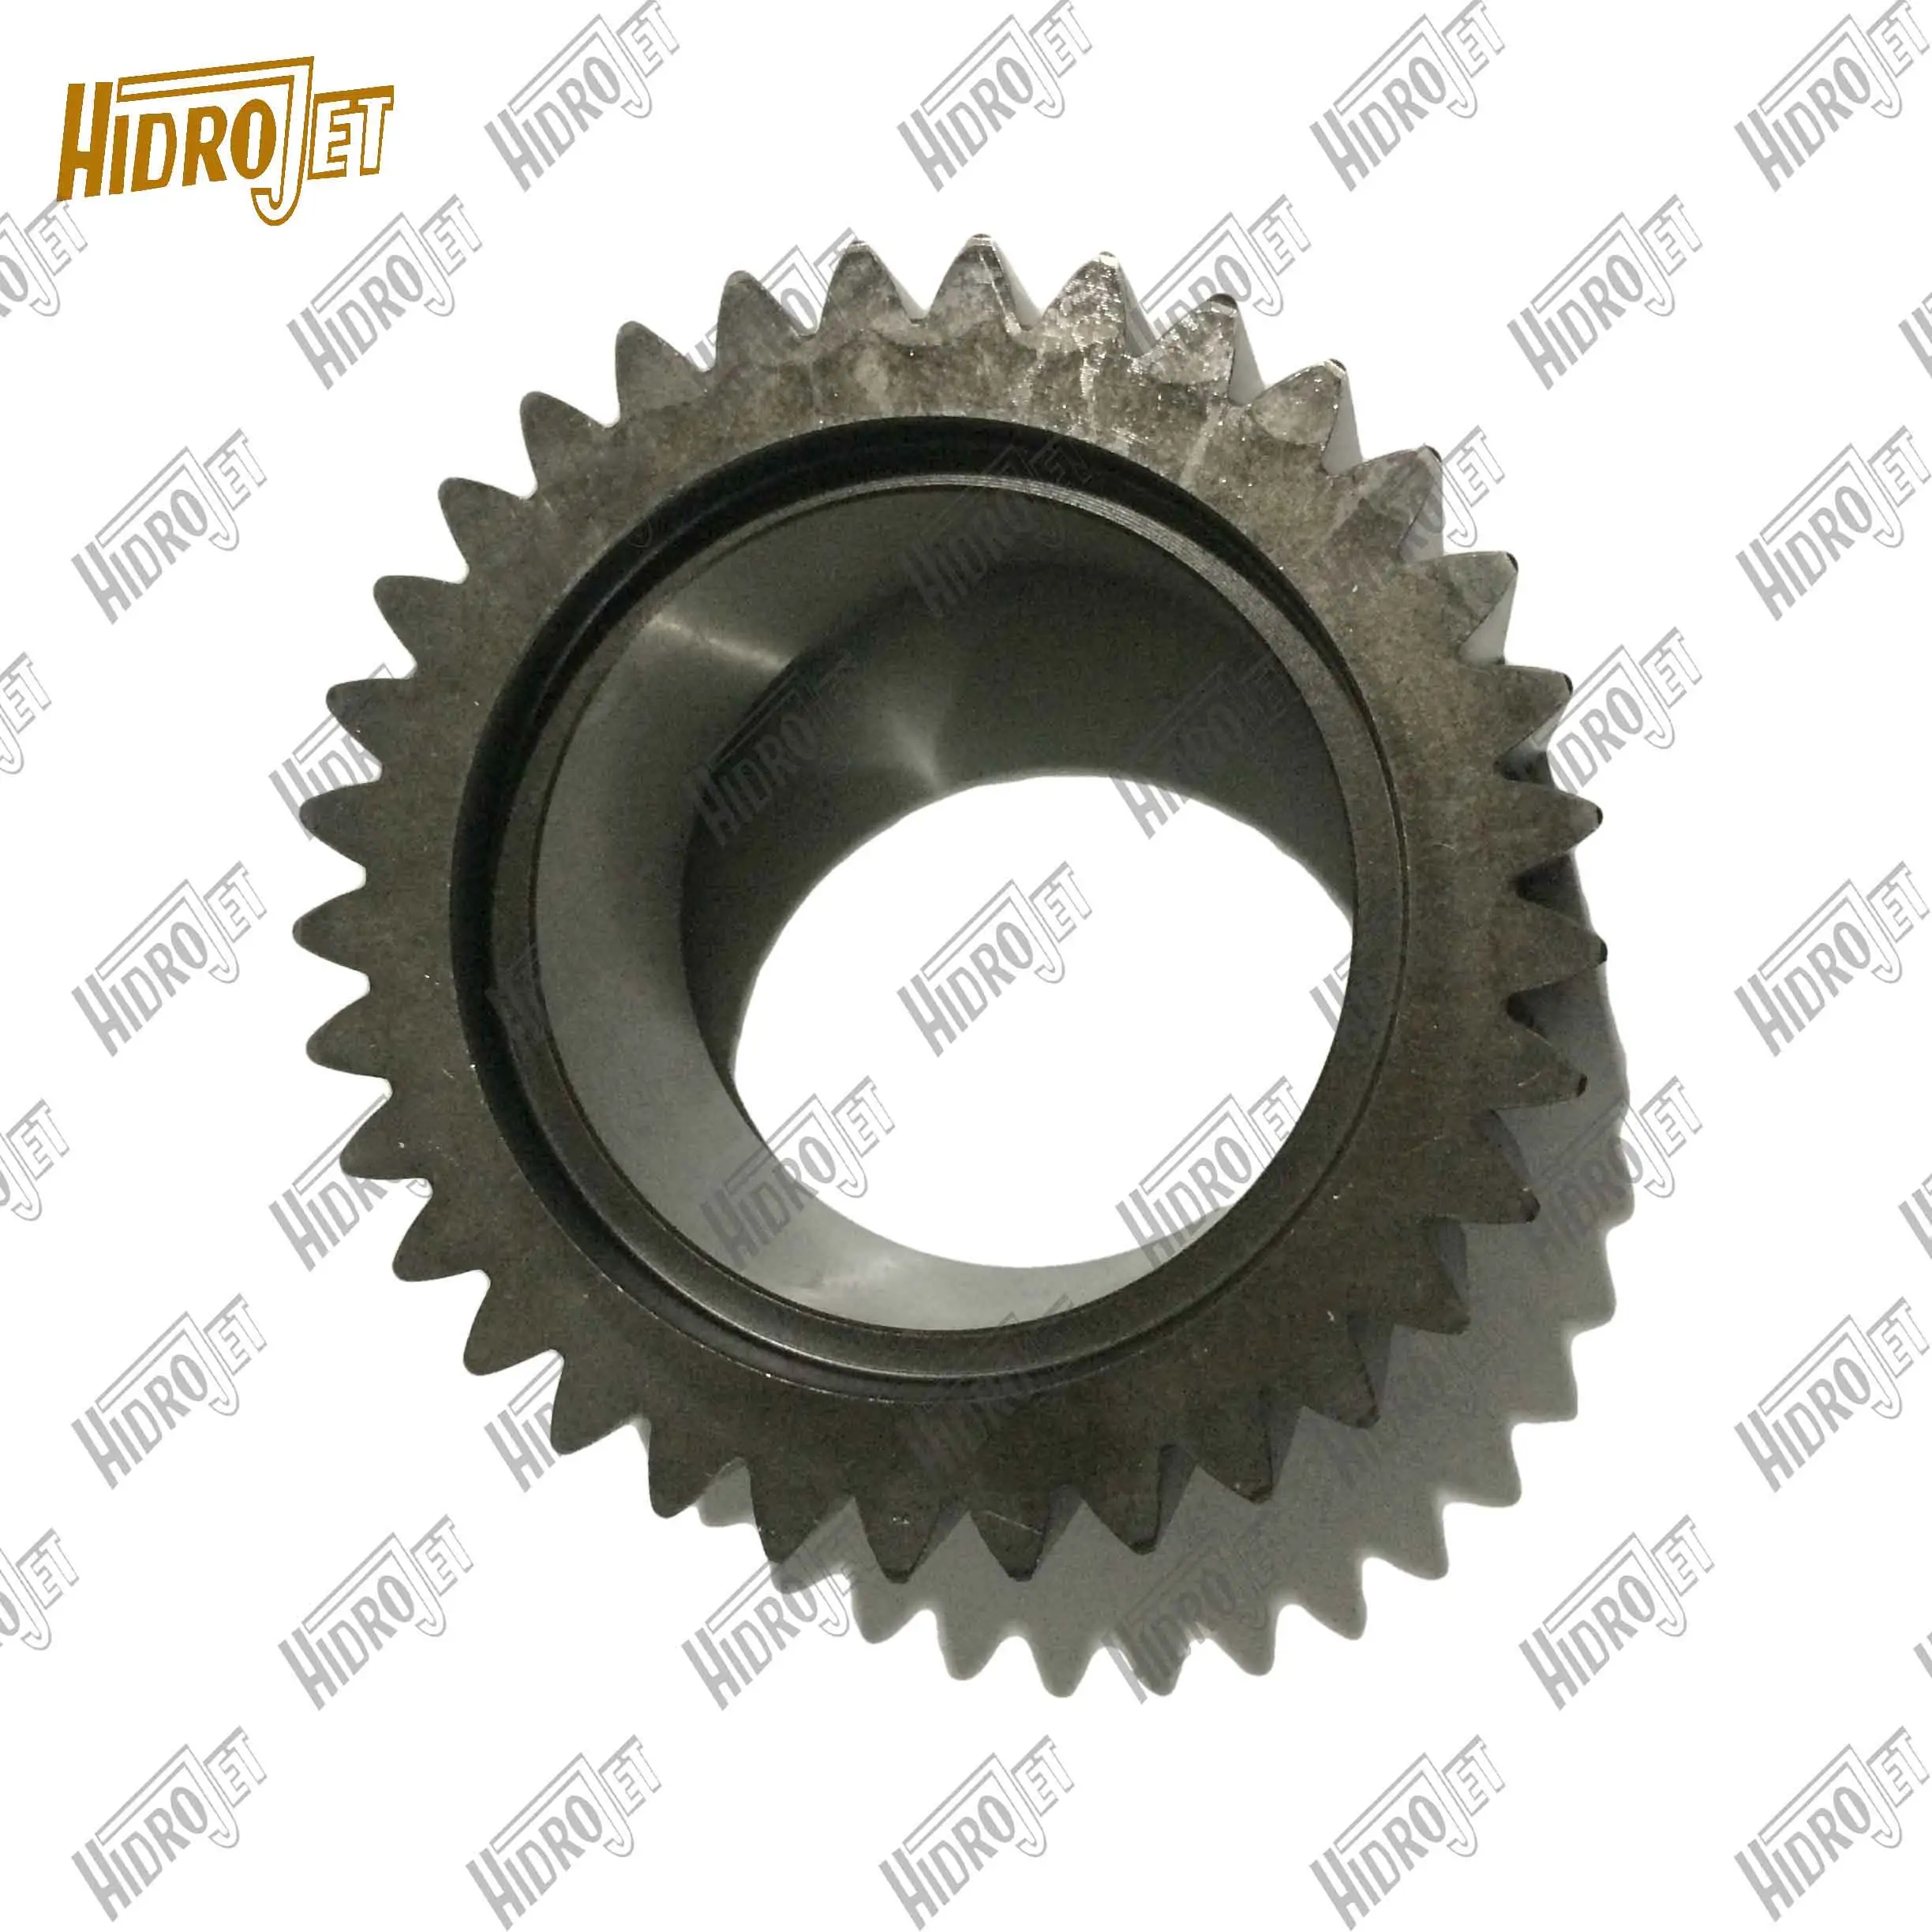 HIDROJET engine parts drive gear LQ15V00007S086 gear for SK210LC